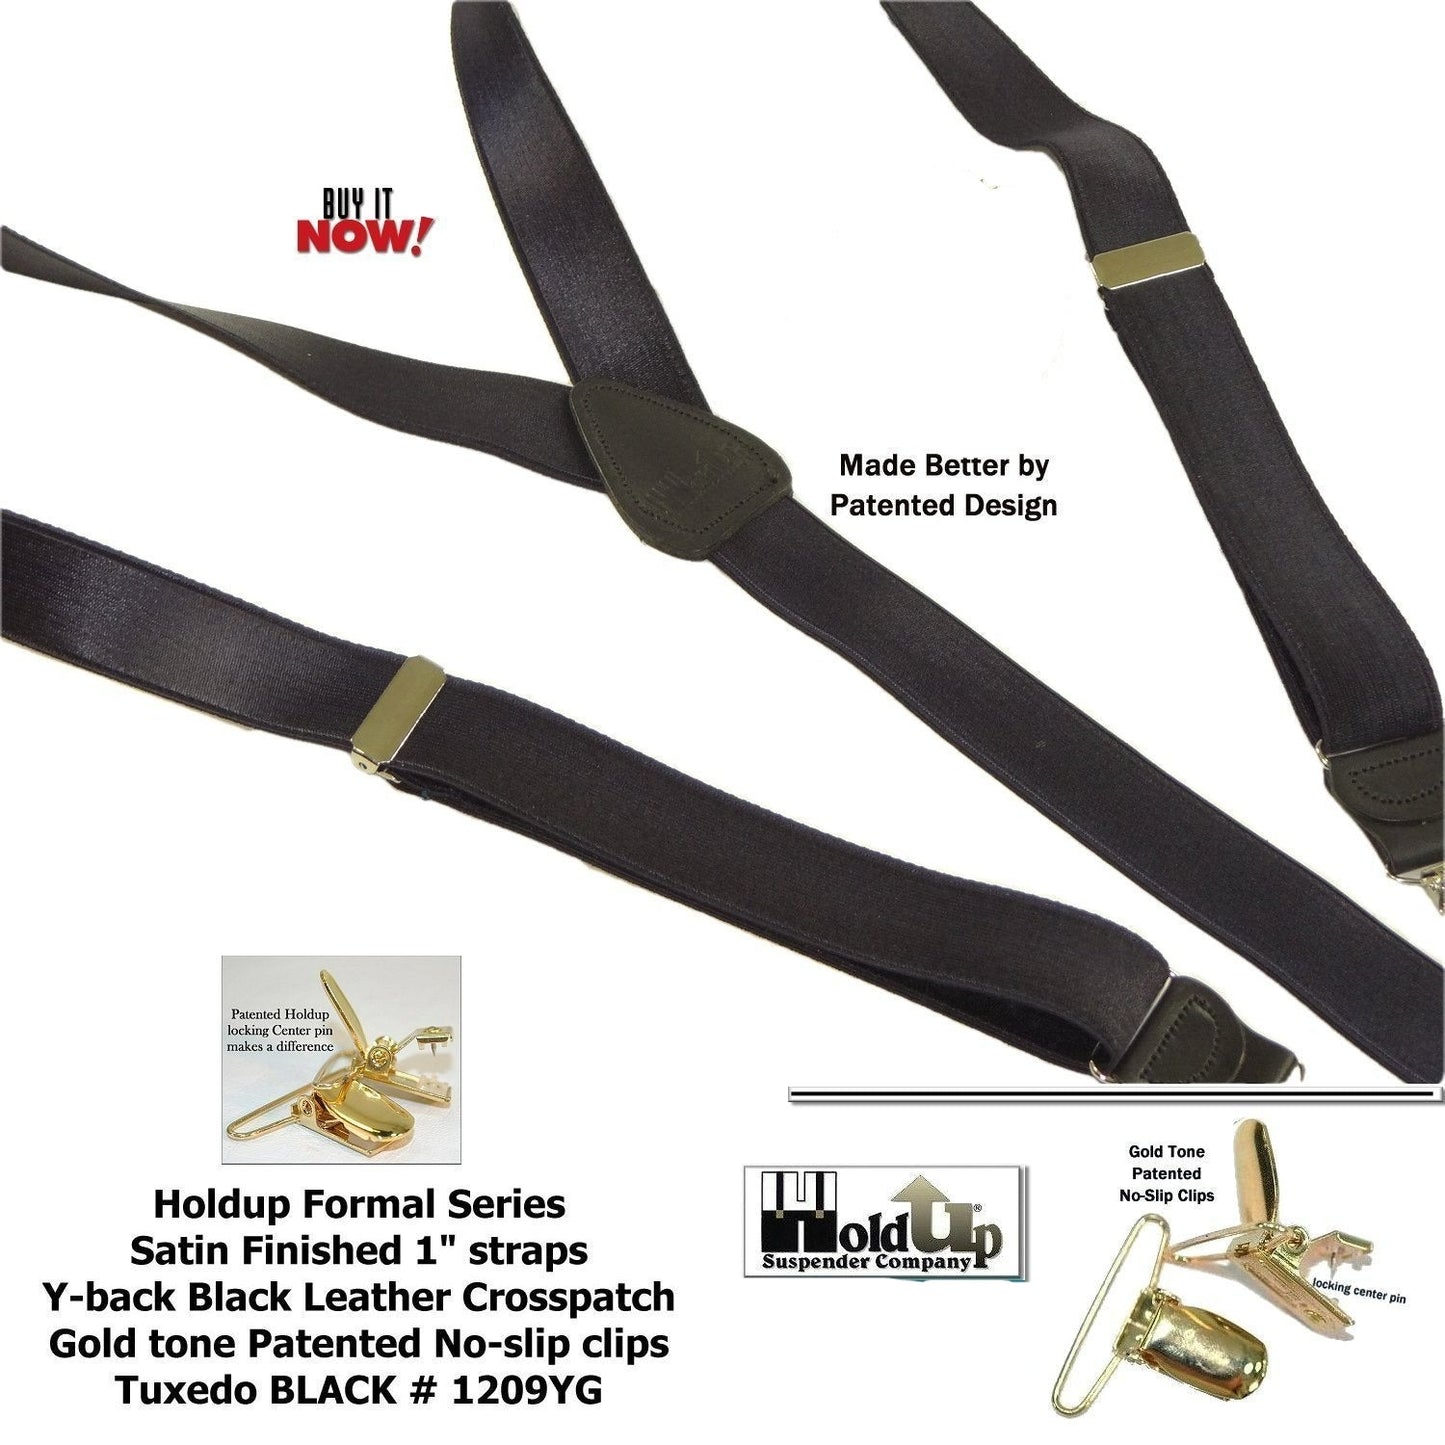 Holdup Brand Black Formal Series 1" Satin Finished Suspenders in Y-back with Gold No-slip Clips